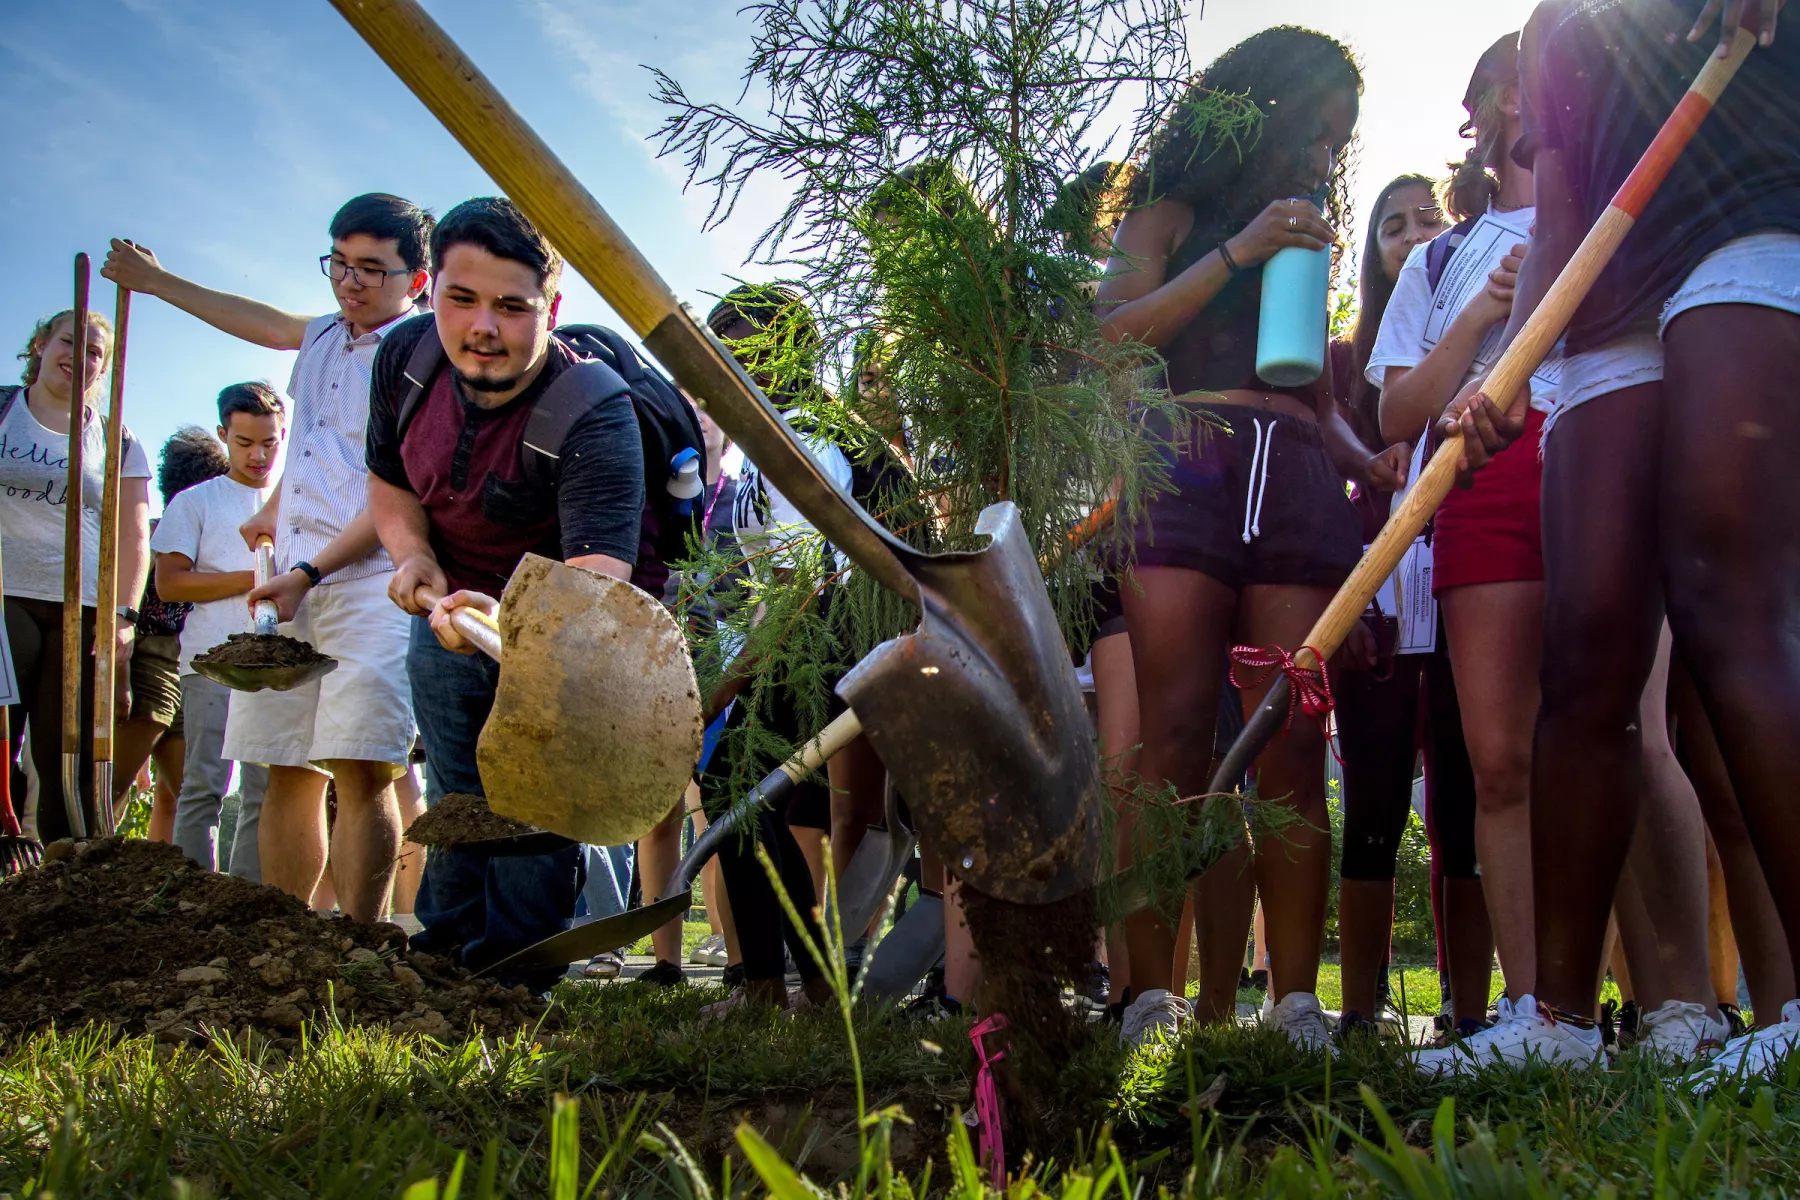 Class of 2024 plants their class tree as part of orientation activities on the campus of Swarthmore College